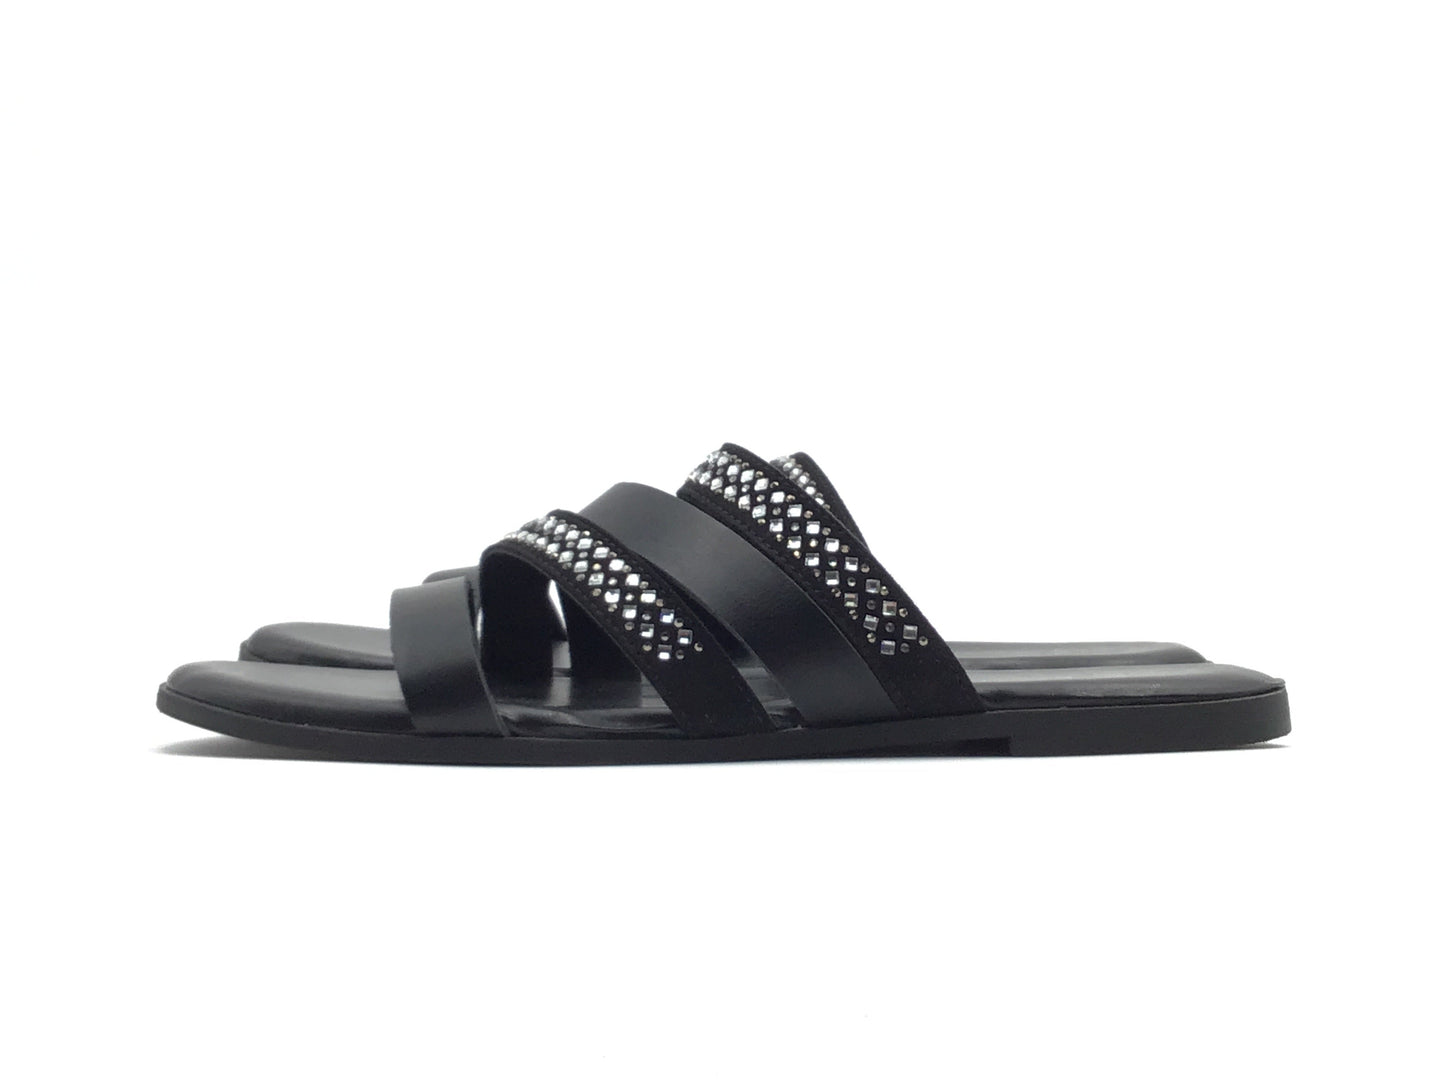 Black & Silver Sandals Flats Time And Tru, Size 7.5